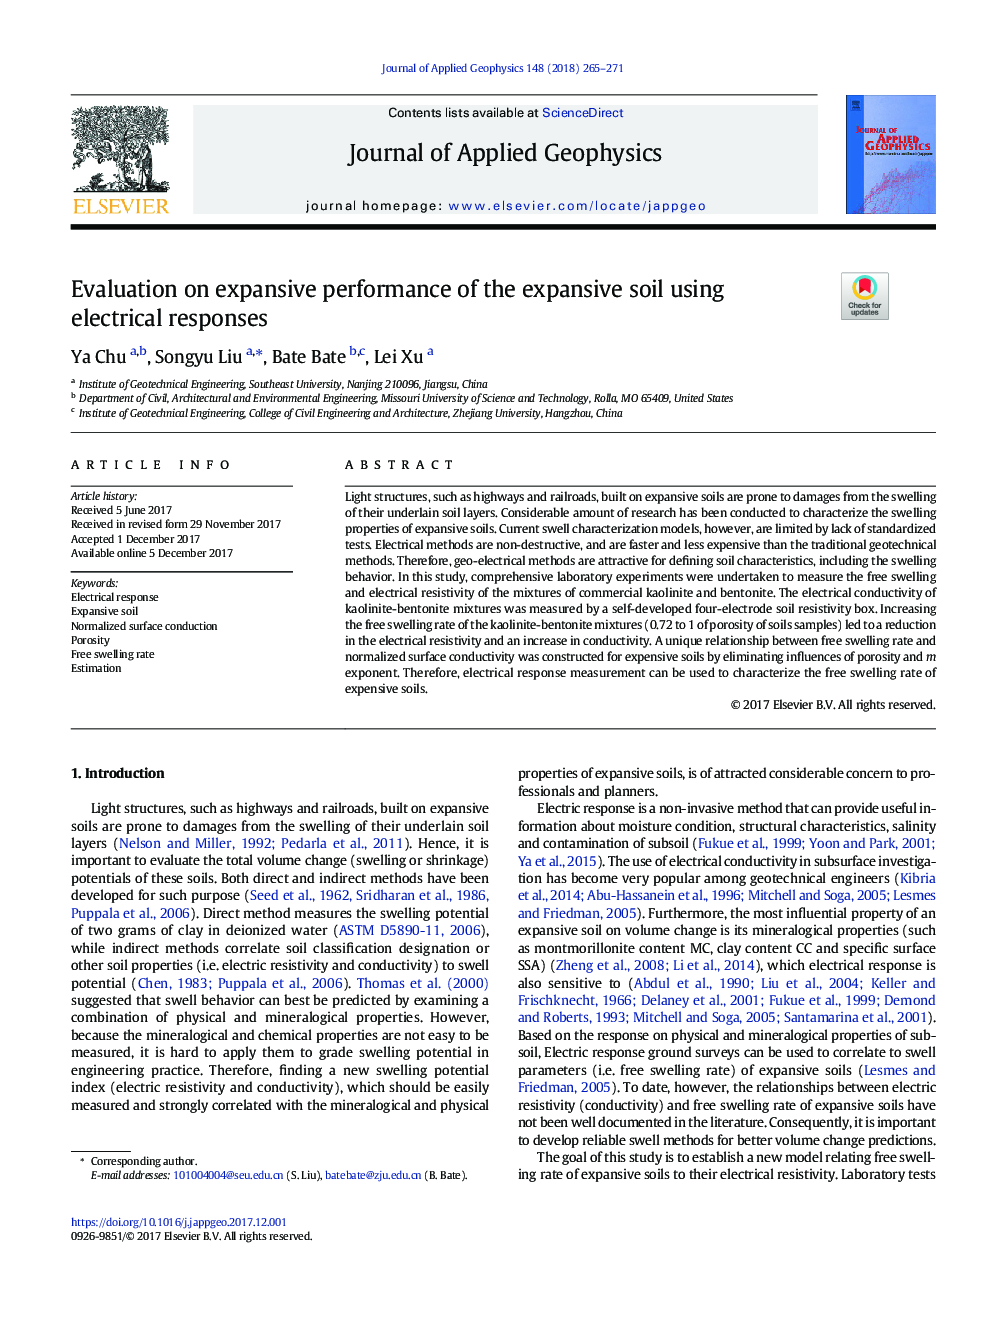 Evaluation on expansive performance of the expansive soil using electrical responses